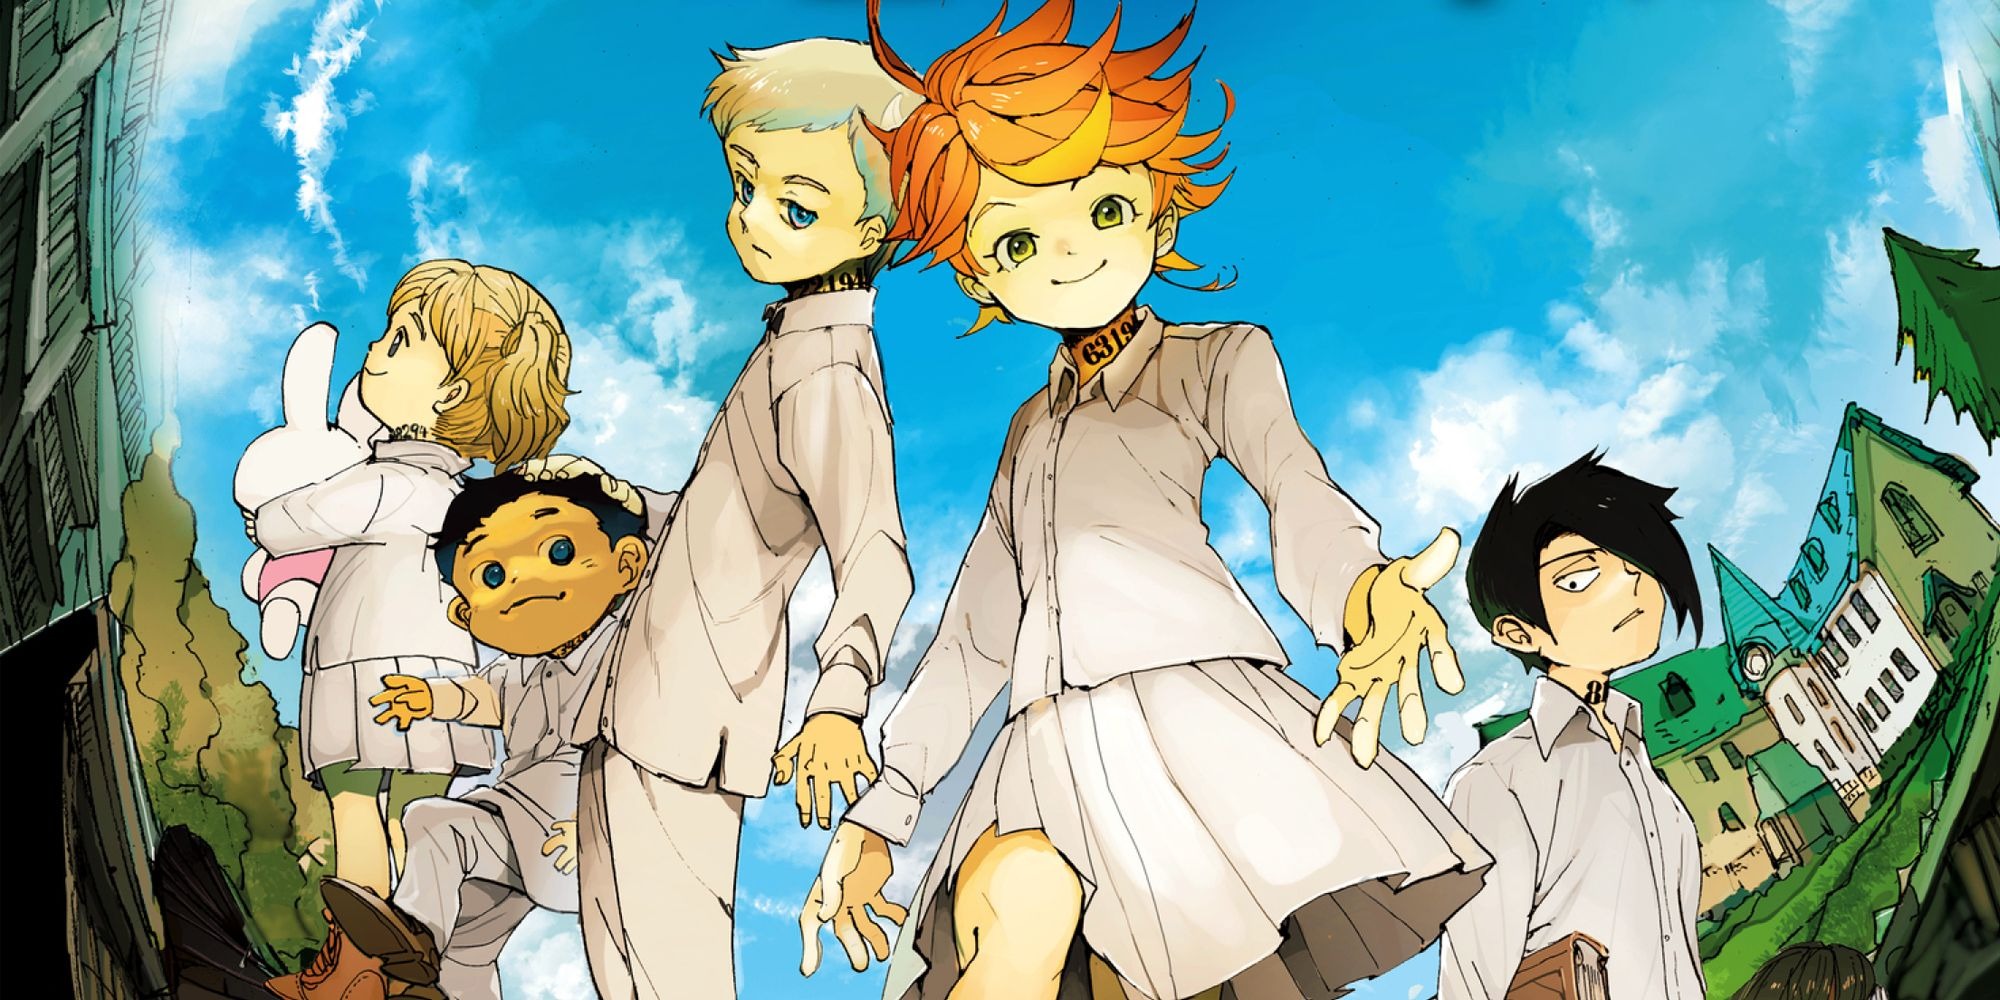 The Promised Neverland Book cove - The Promised Neverland Store